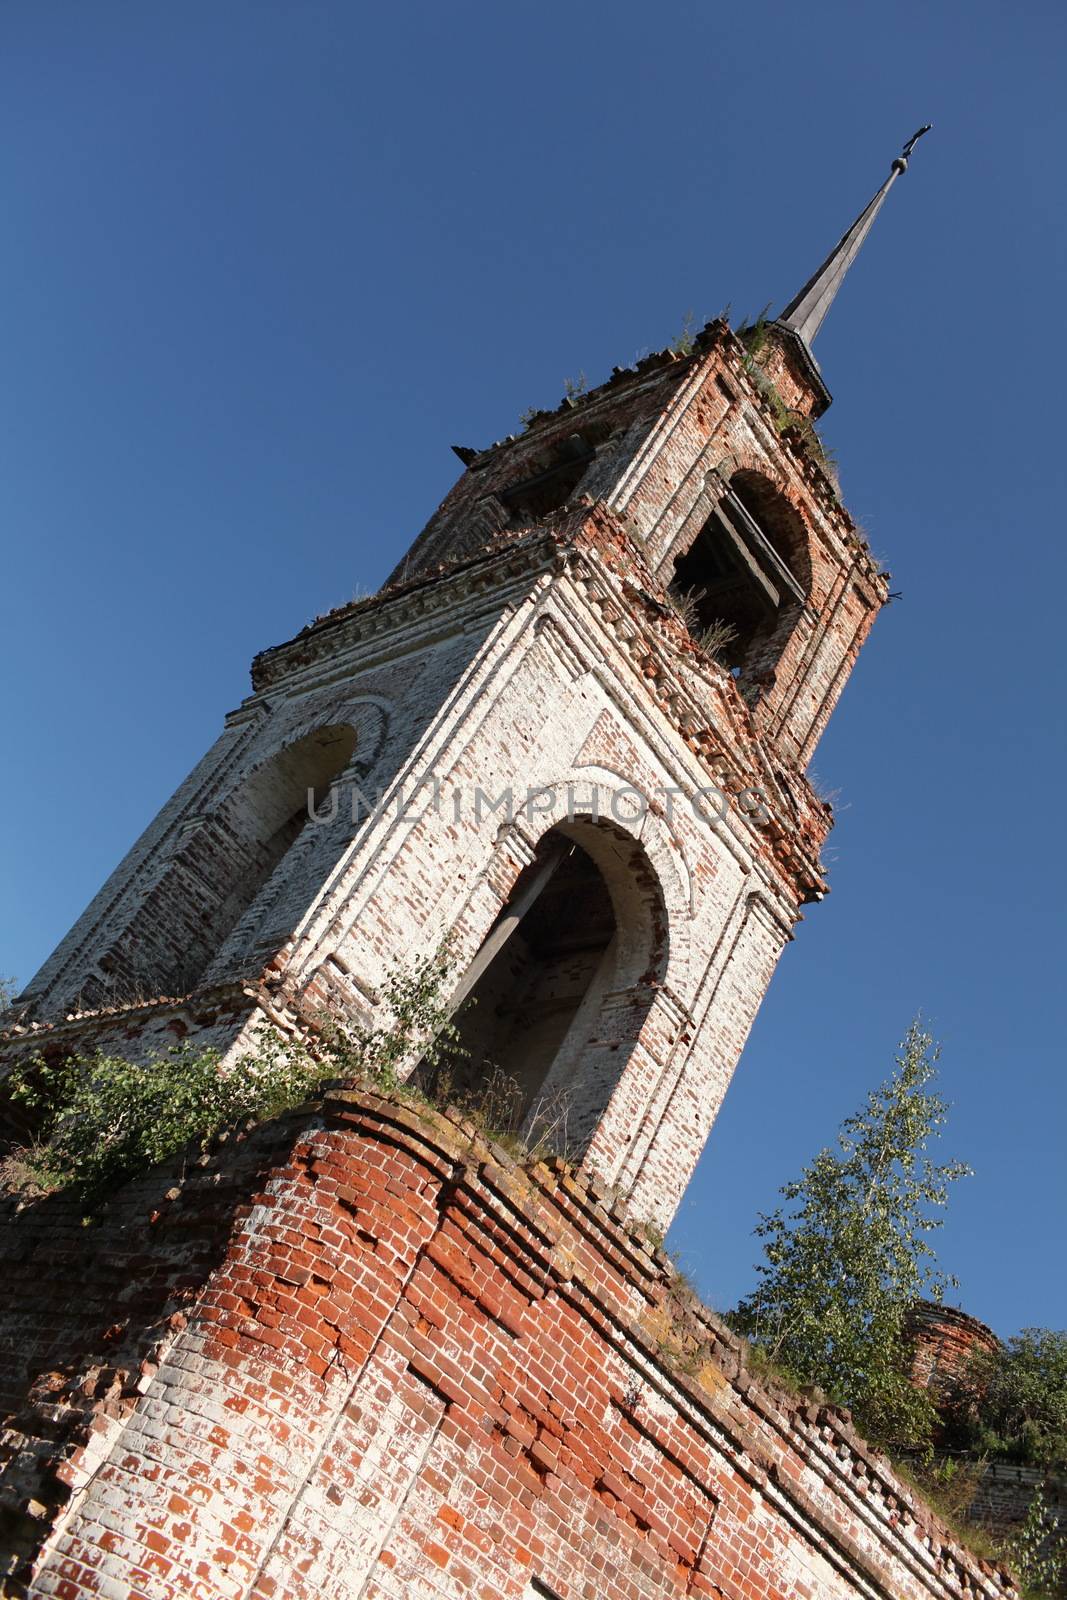 Ruined temple, falling bell tower, the concept of loss of faith